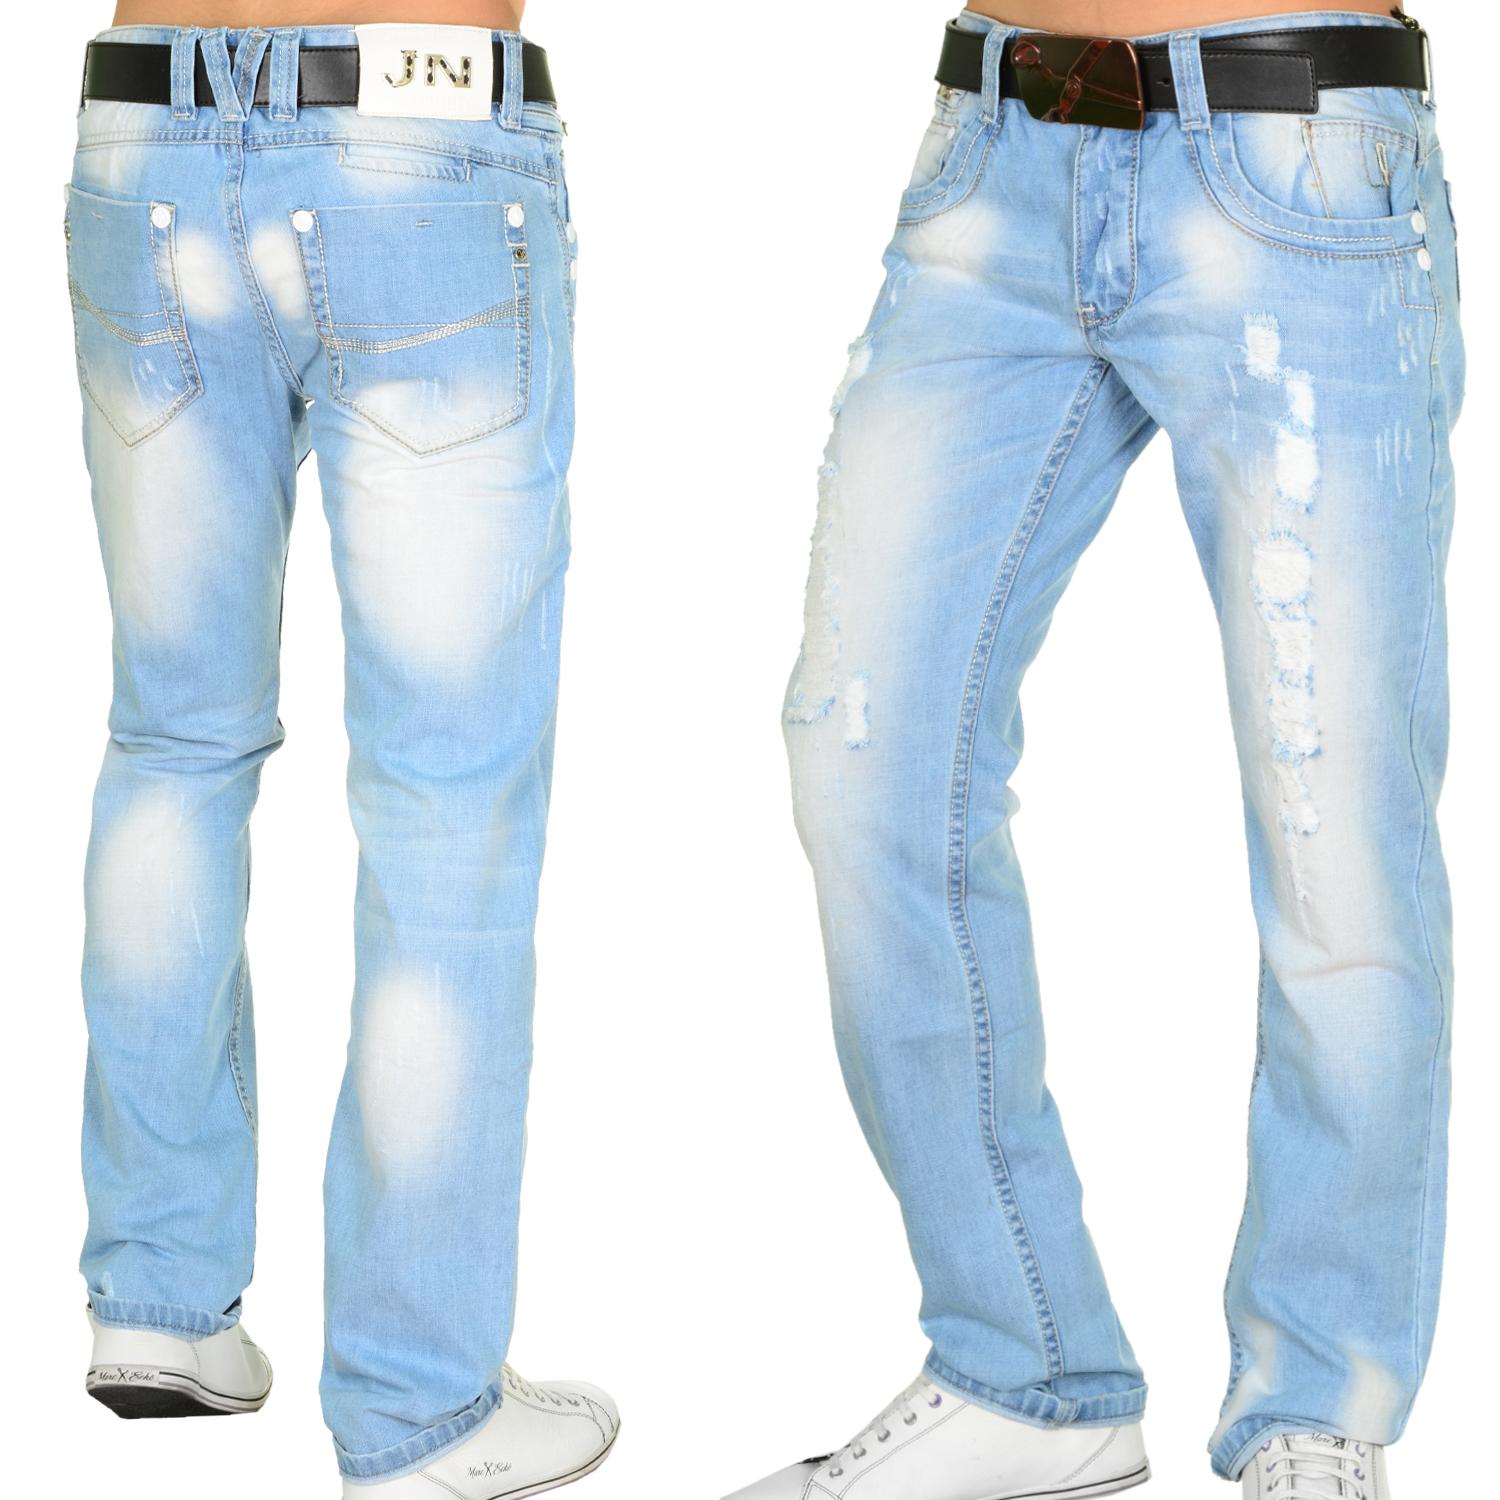 Foto Jeansnet Dirty Washed Regular Fit Jeans Azul Claro